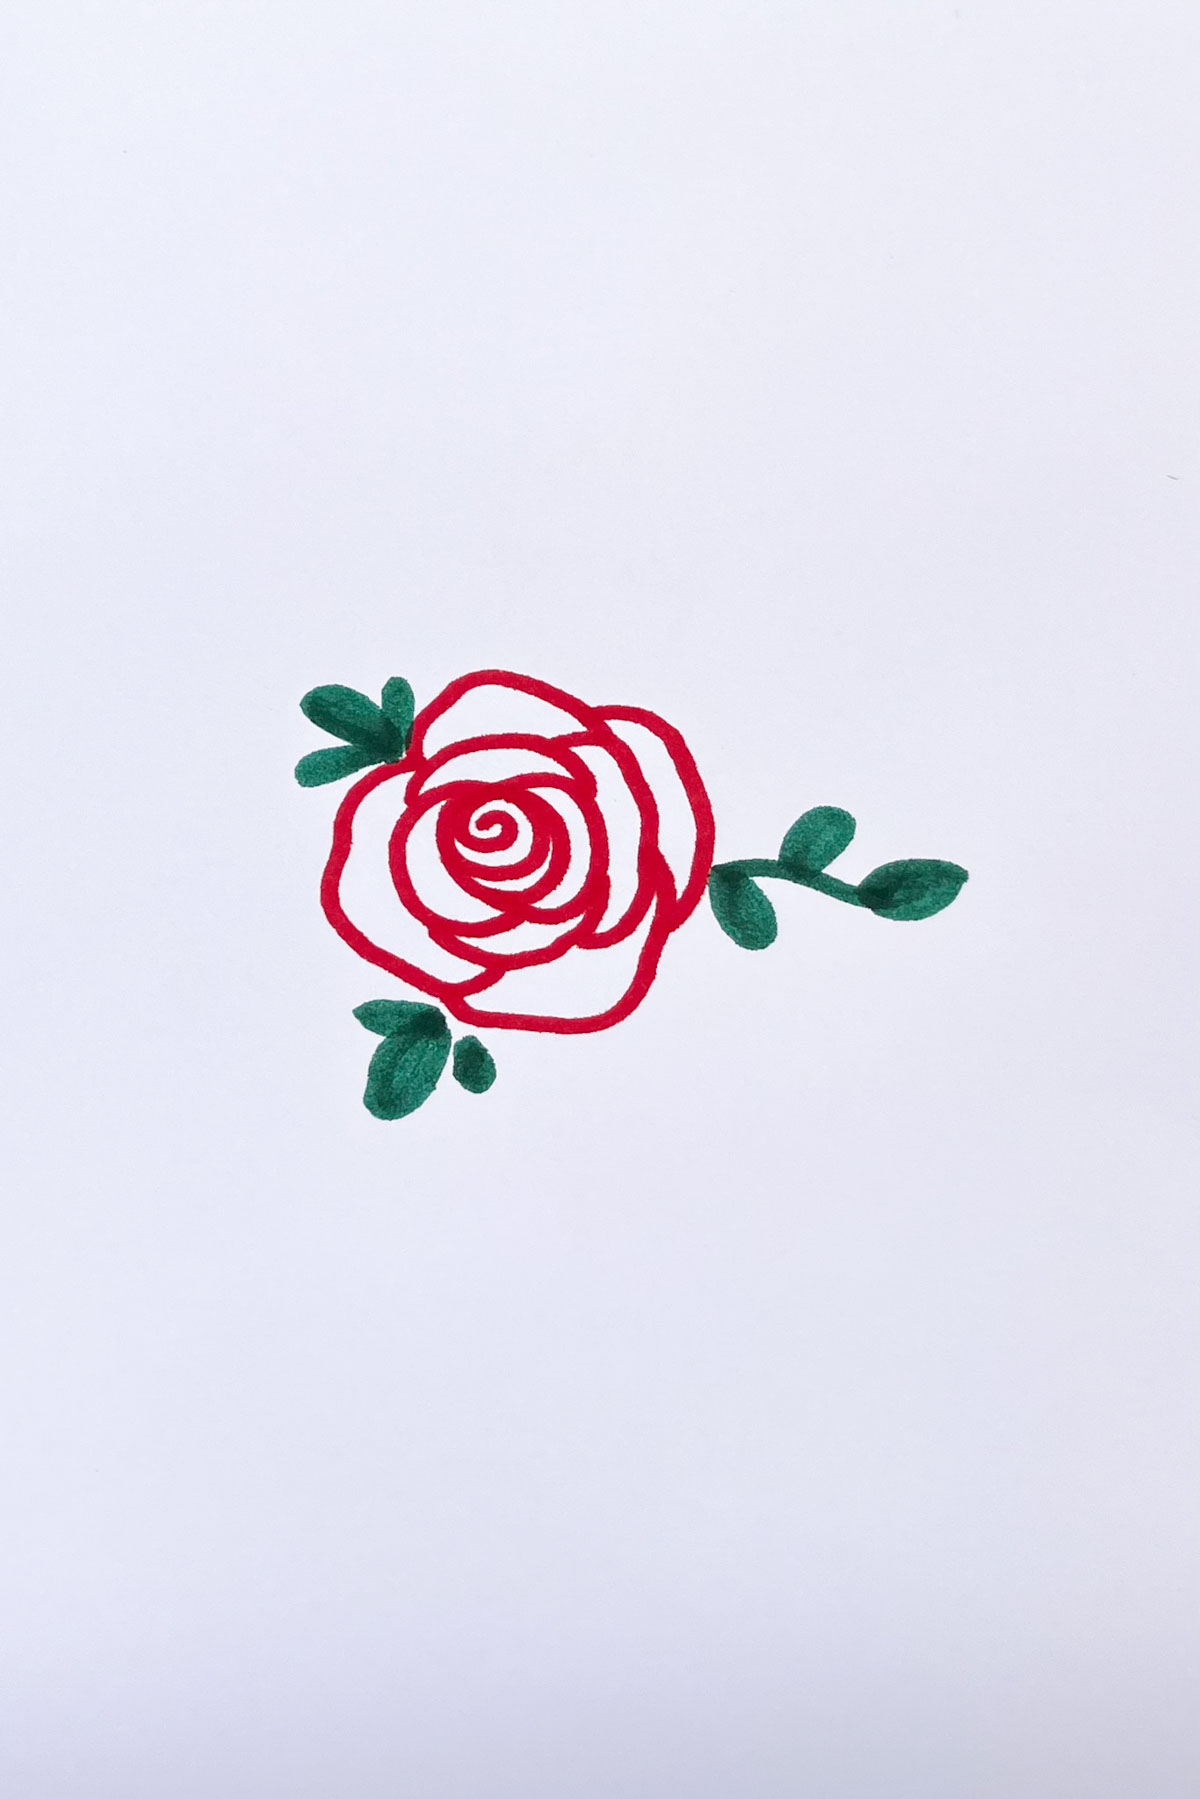 red rose flower drawing